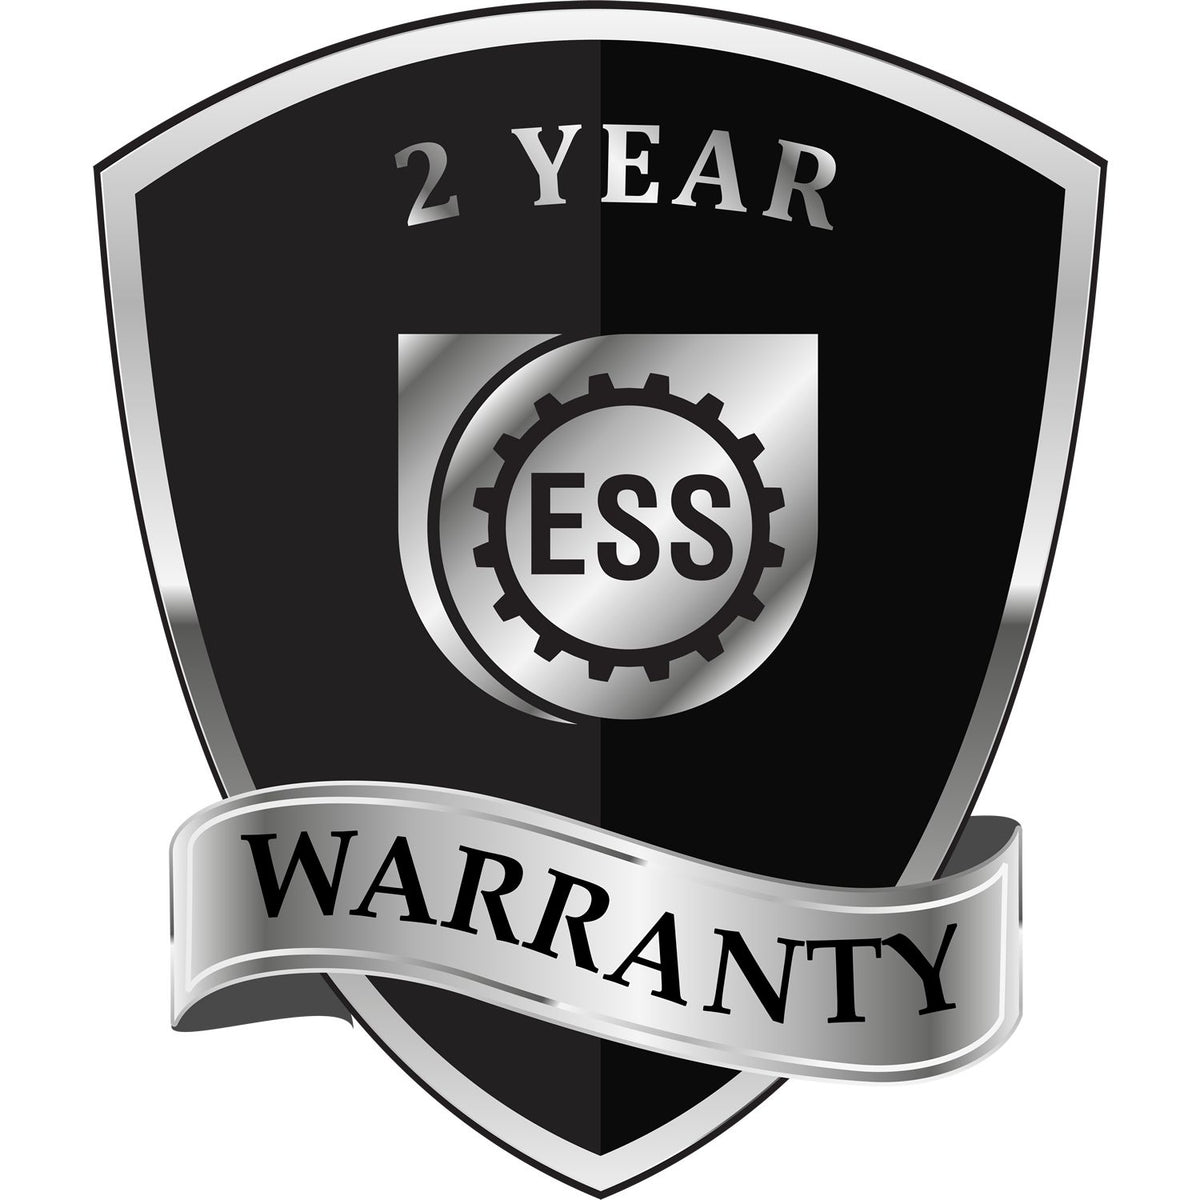 A black and silver badge or emblem showing warranty information for the Gift Missouri Architect Seal